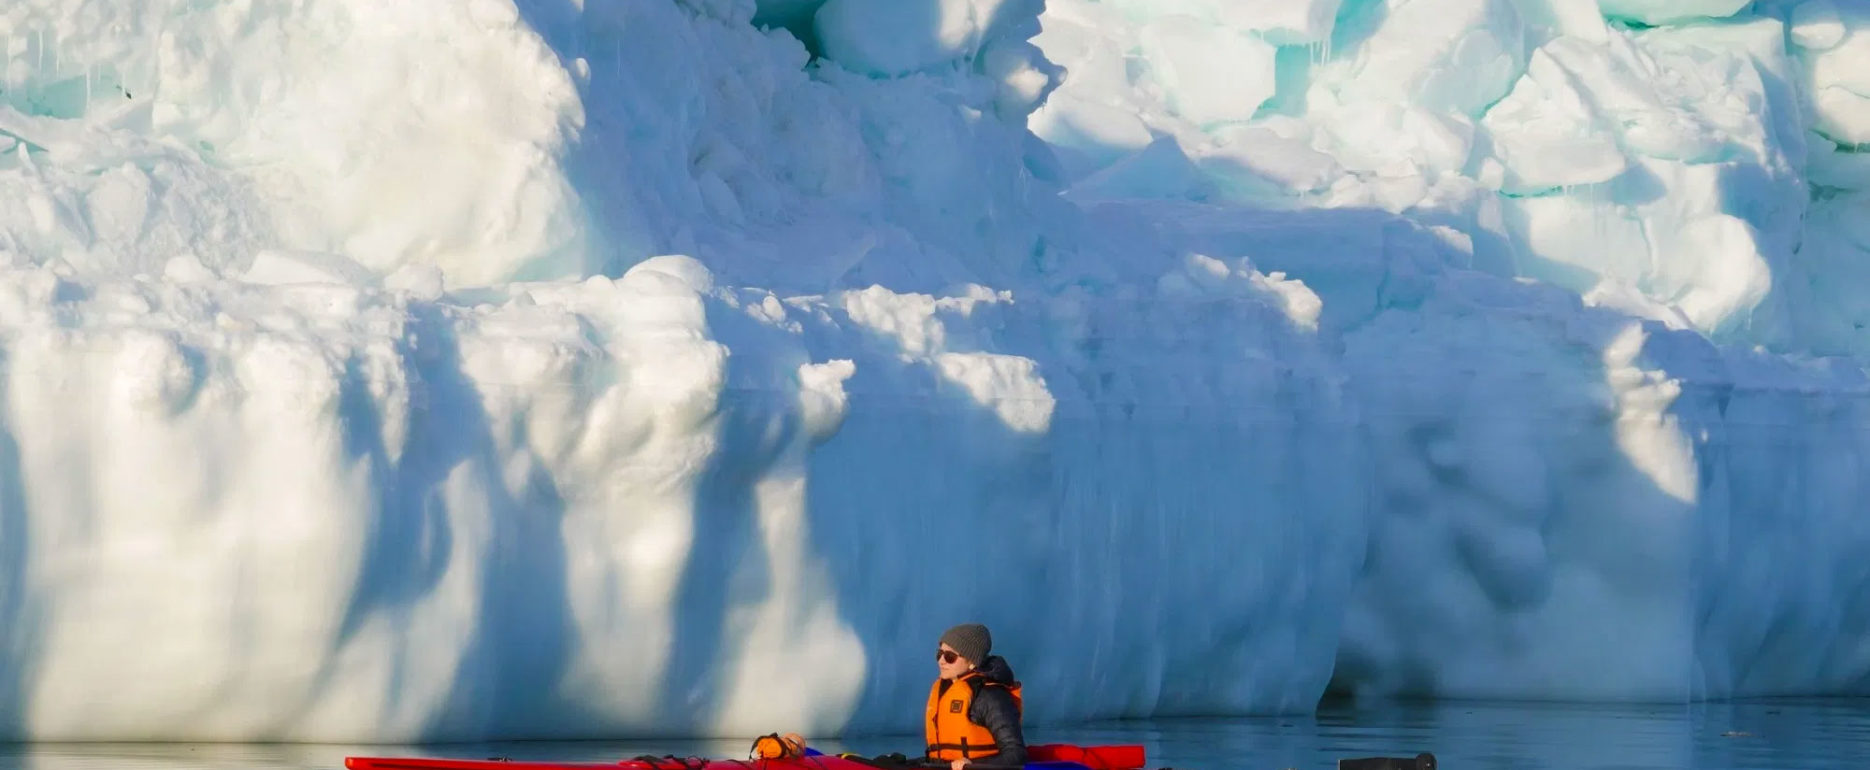 Guide Jody Steeves slips through the calm waters of Hudson Bay in a kayak on Churchill Wild's Journey to the Floe Edge safari